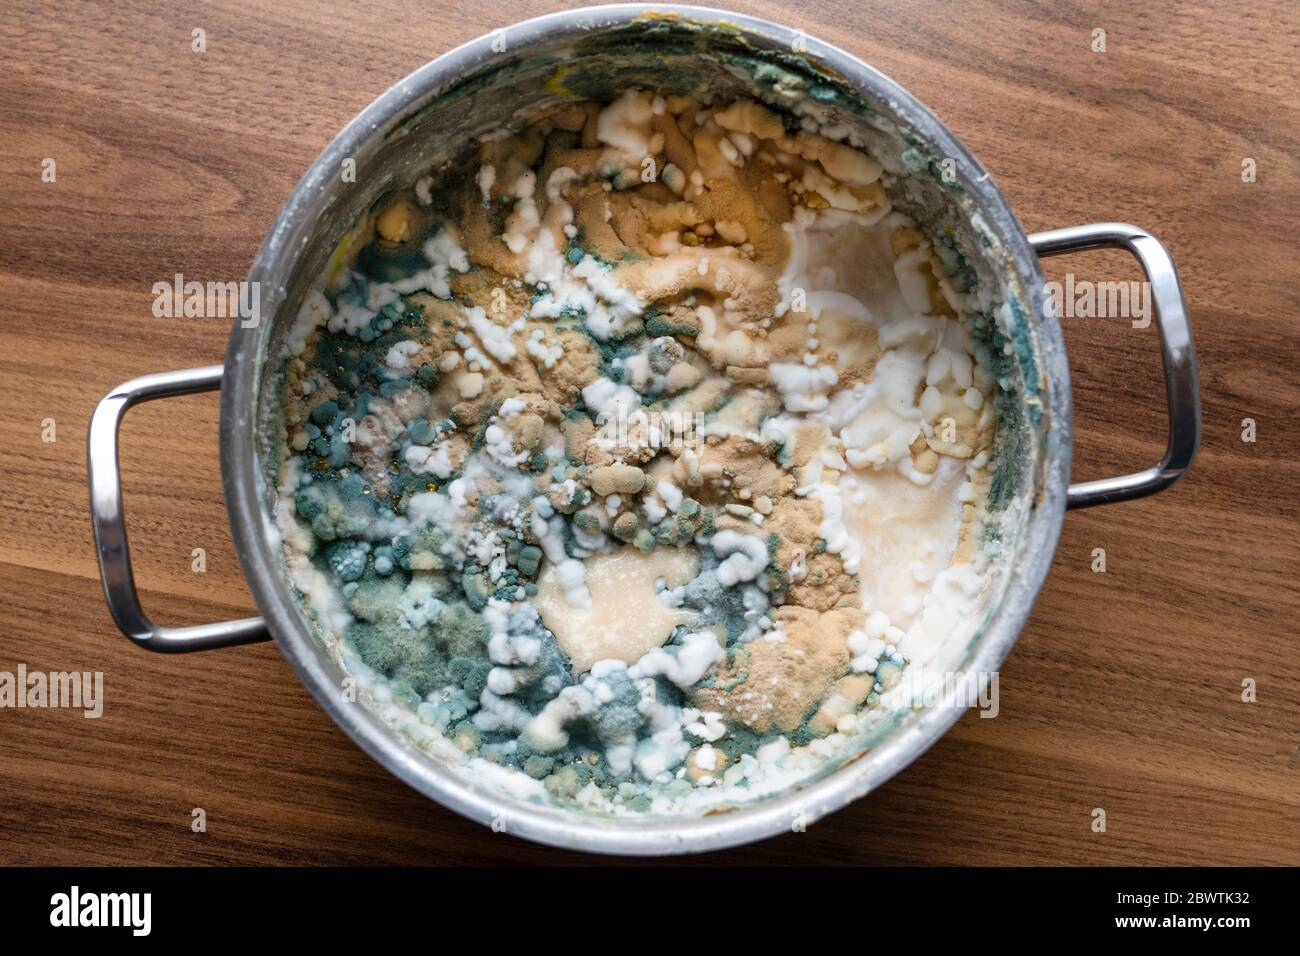 Moldy food in a pot Stock Photo